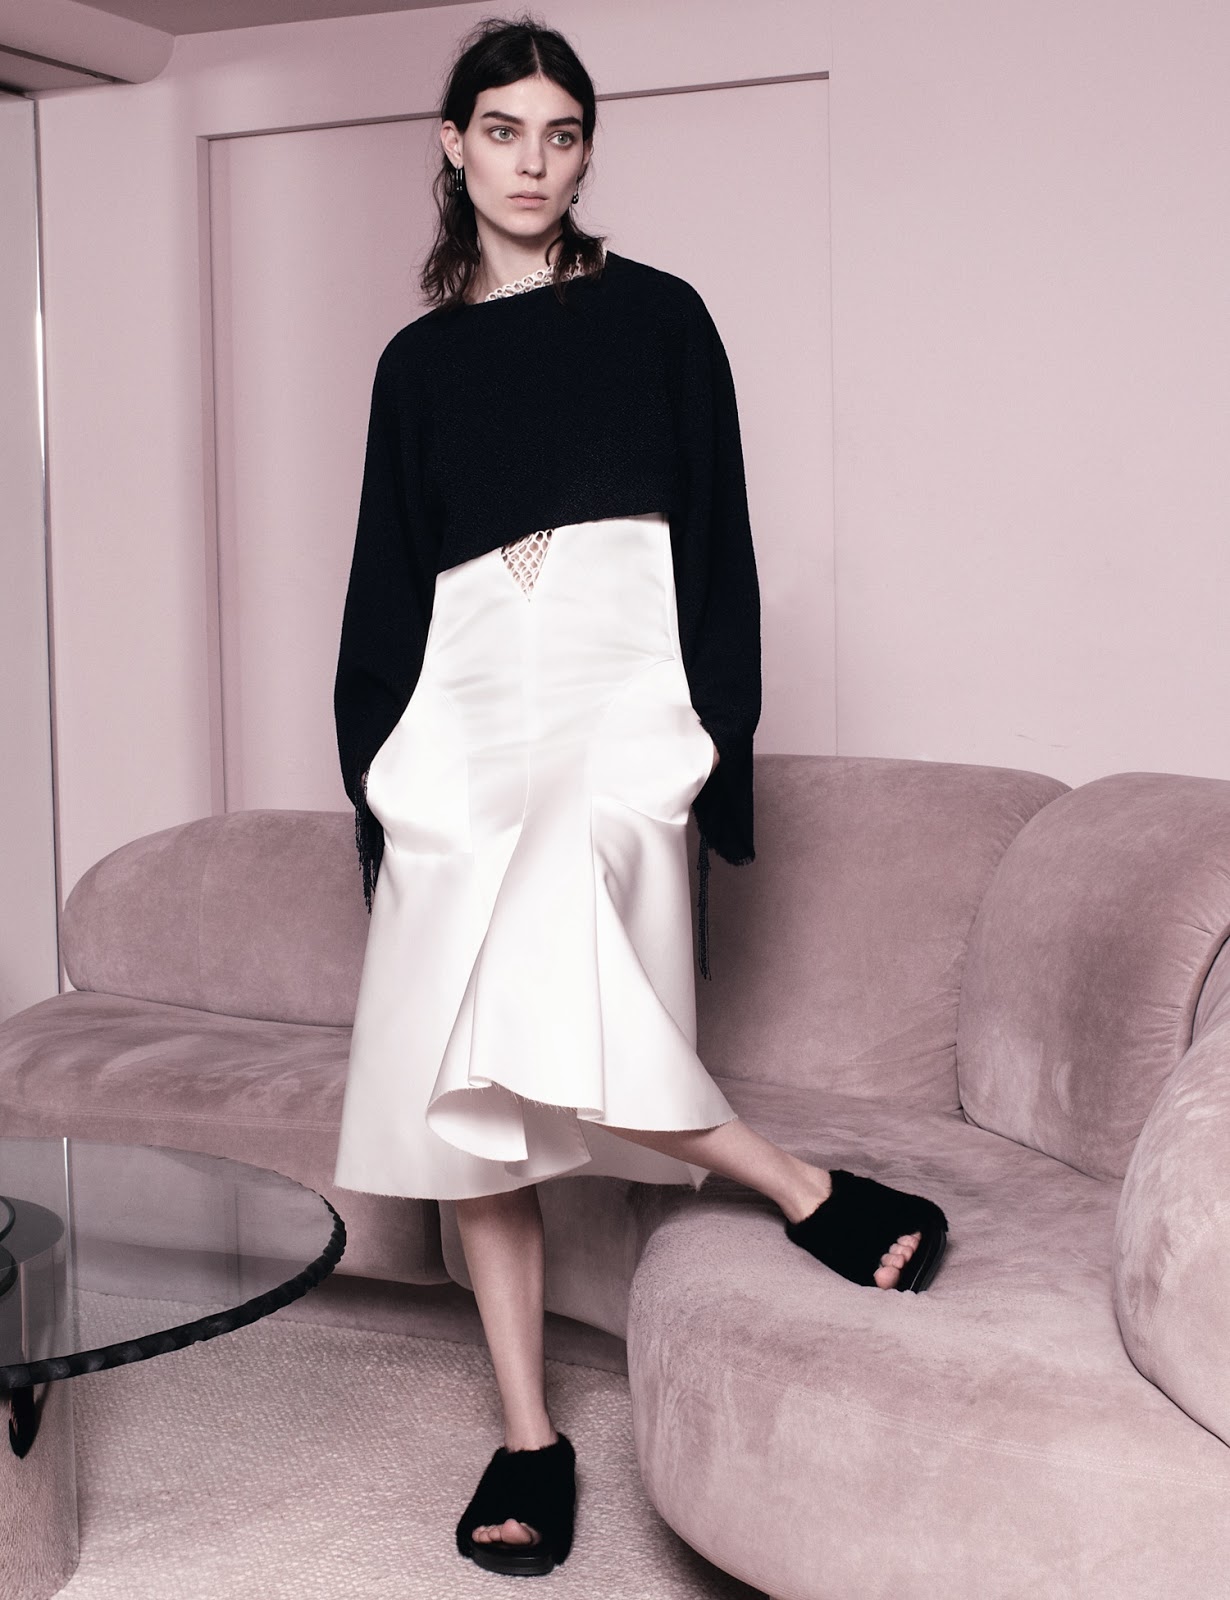 kati nescher by daniel jackson for anOther spring/summer 2013 | visual ...